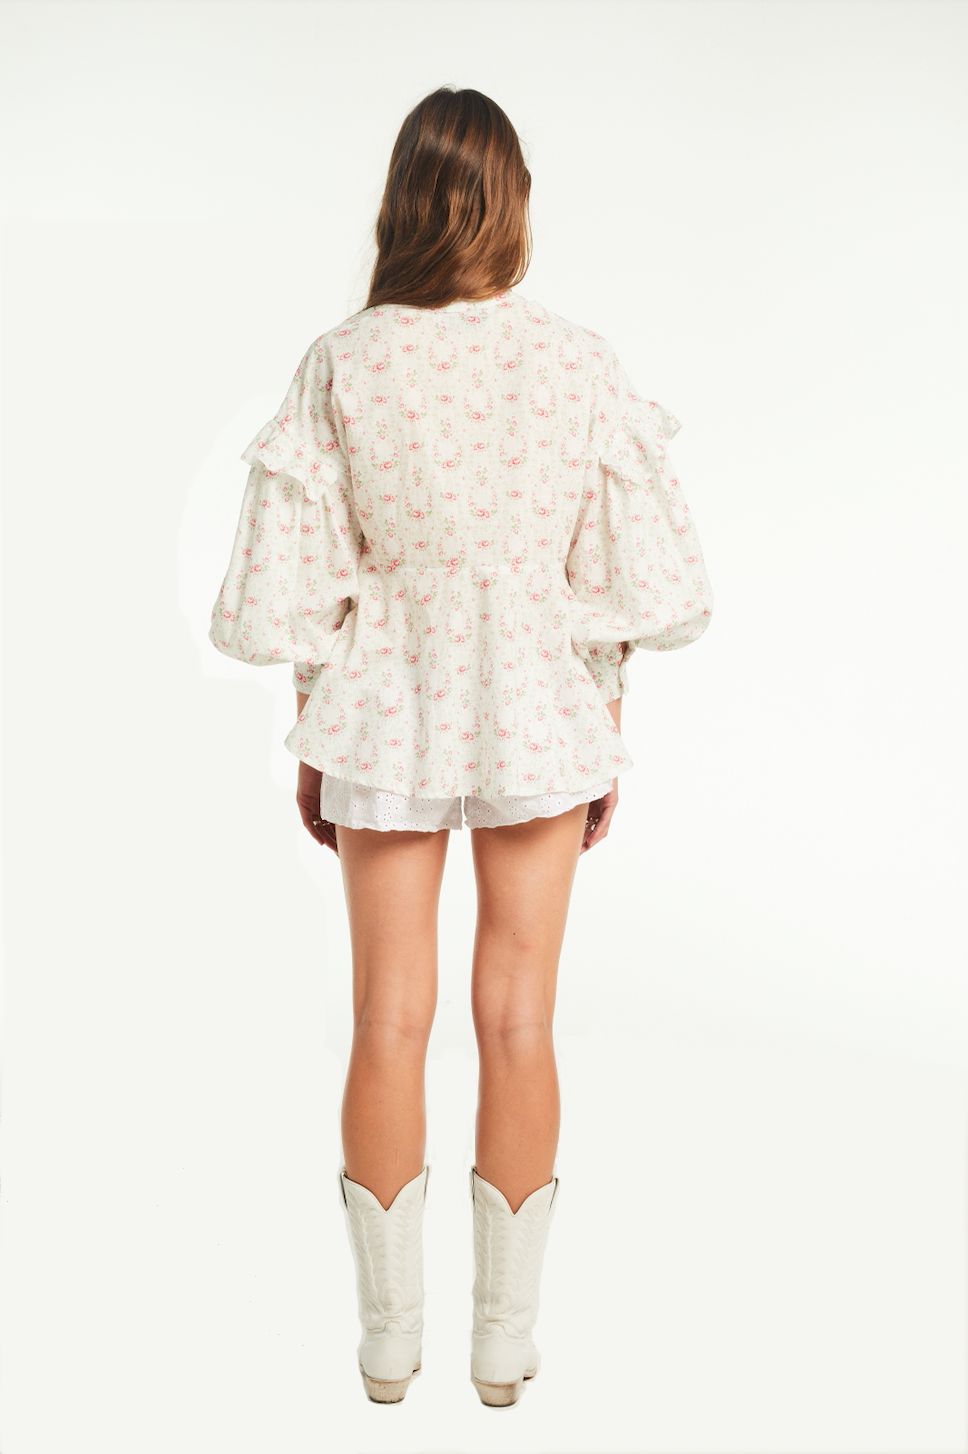 AMARANTA - shorts in cotton broderie anglaise